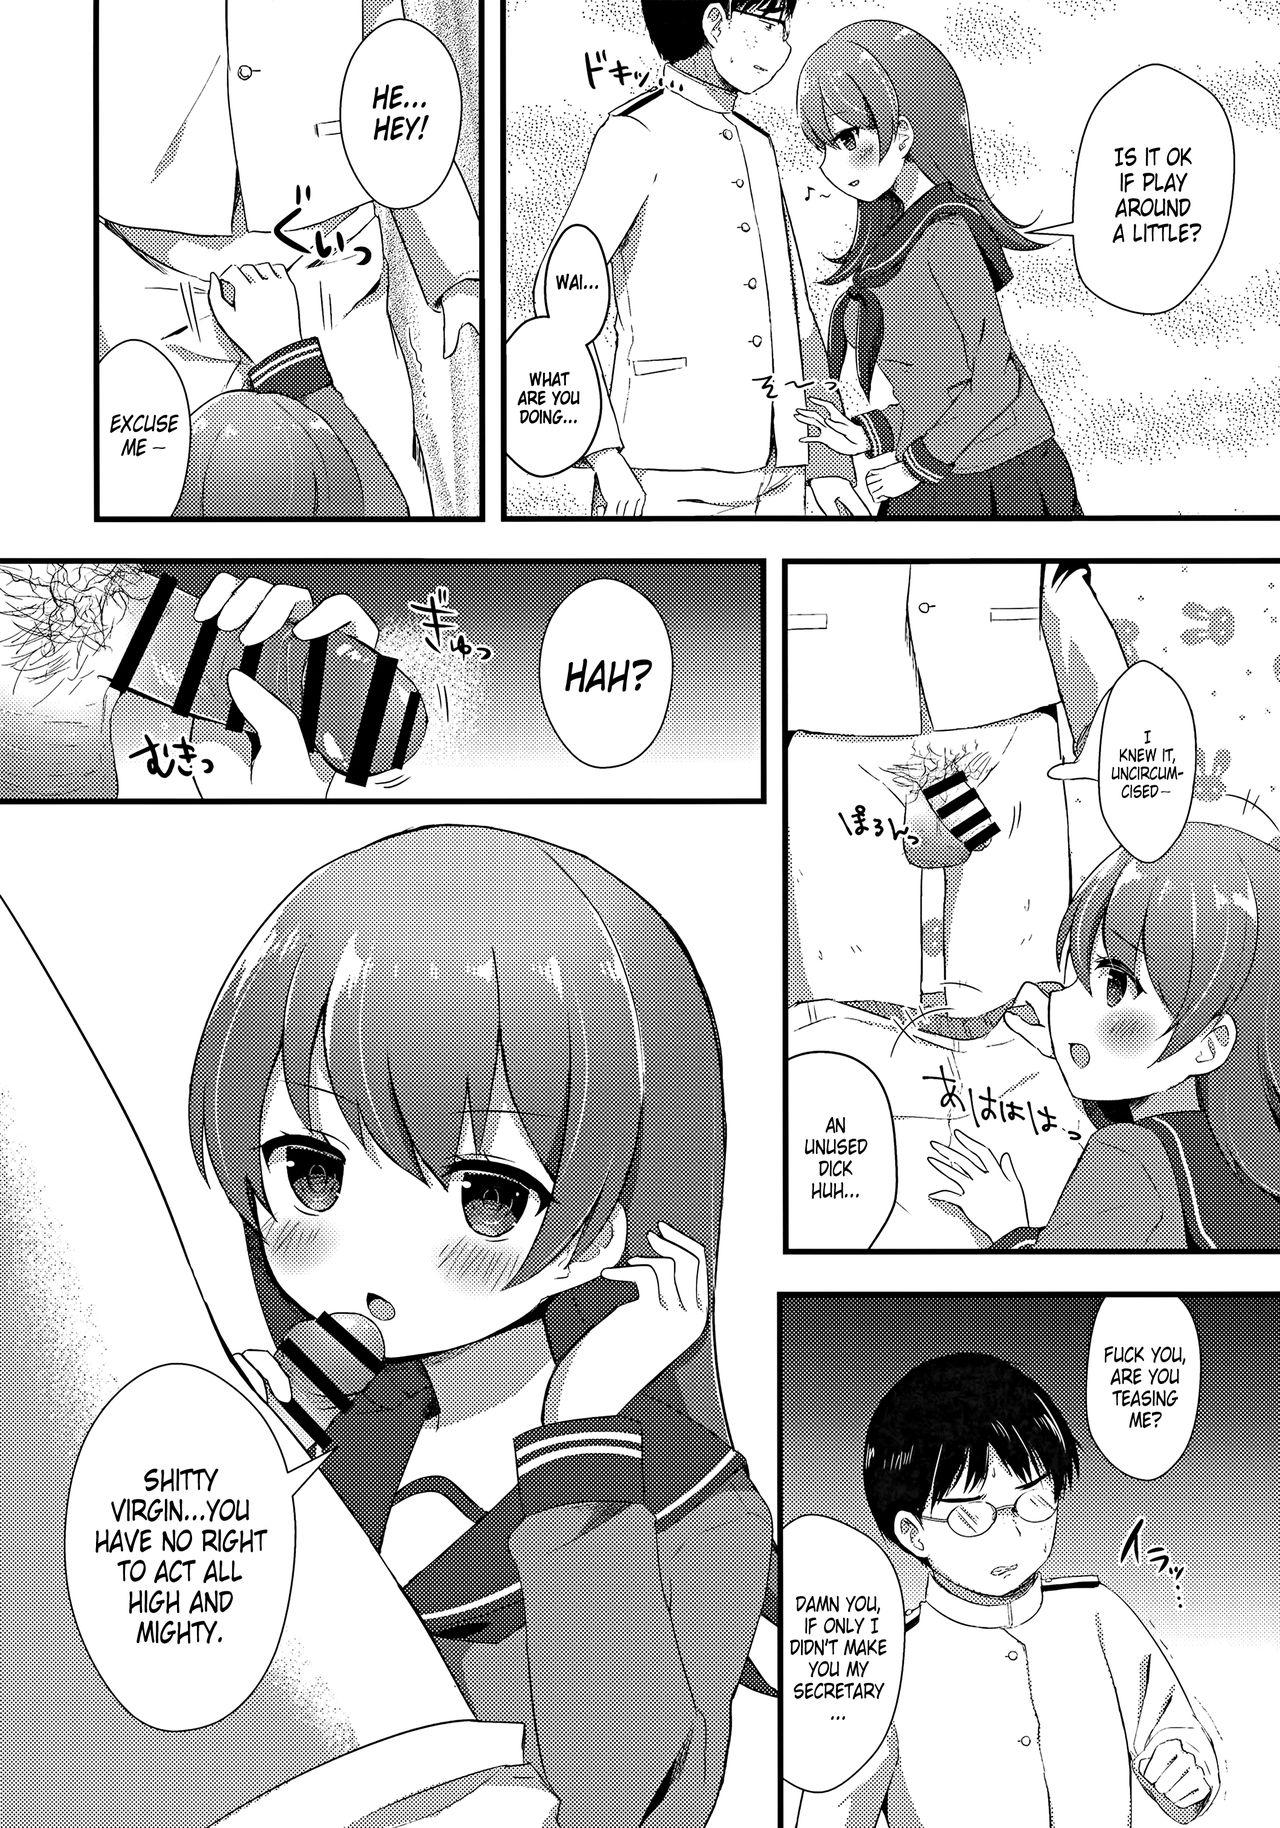 Buttfucking Ooicchi no Ijiwaru Fudeoroshi | Ooicchi's a Meanie, A Man's First Experience - Kantai collection Bigass - Page 7